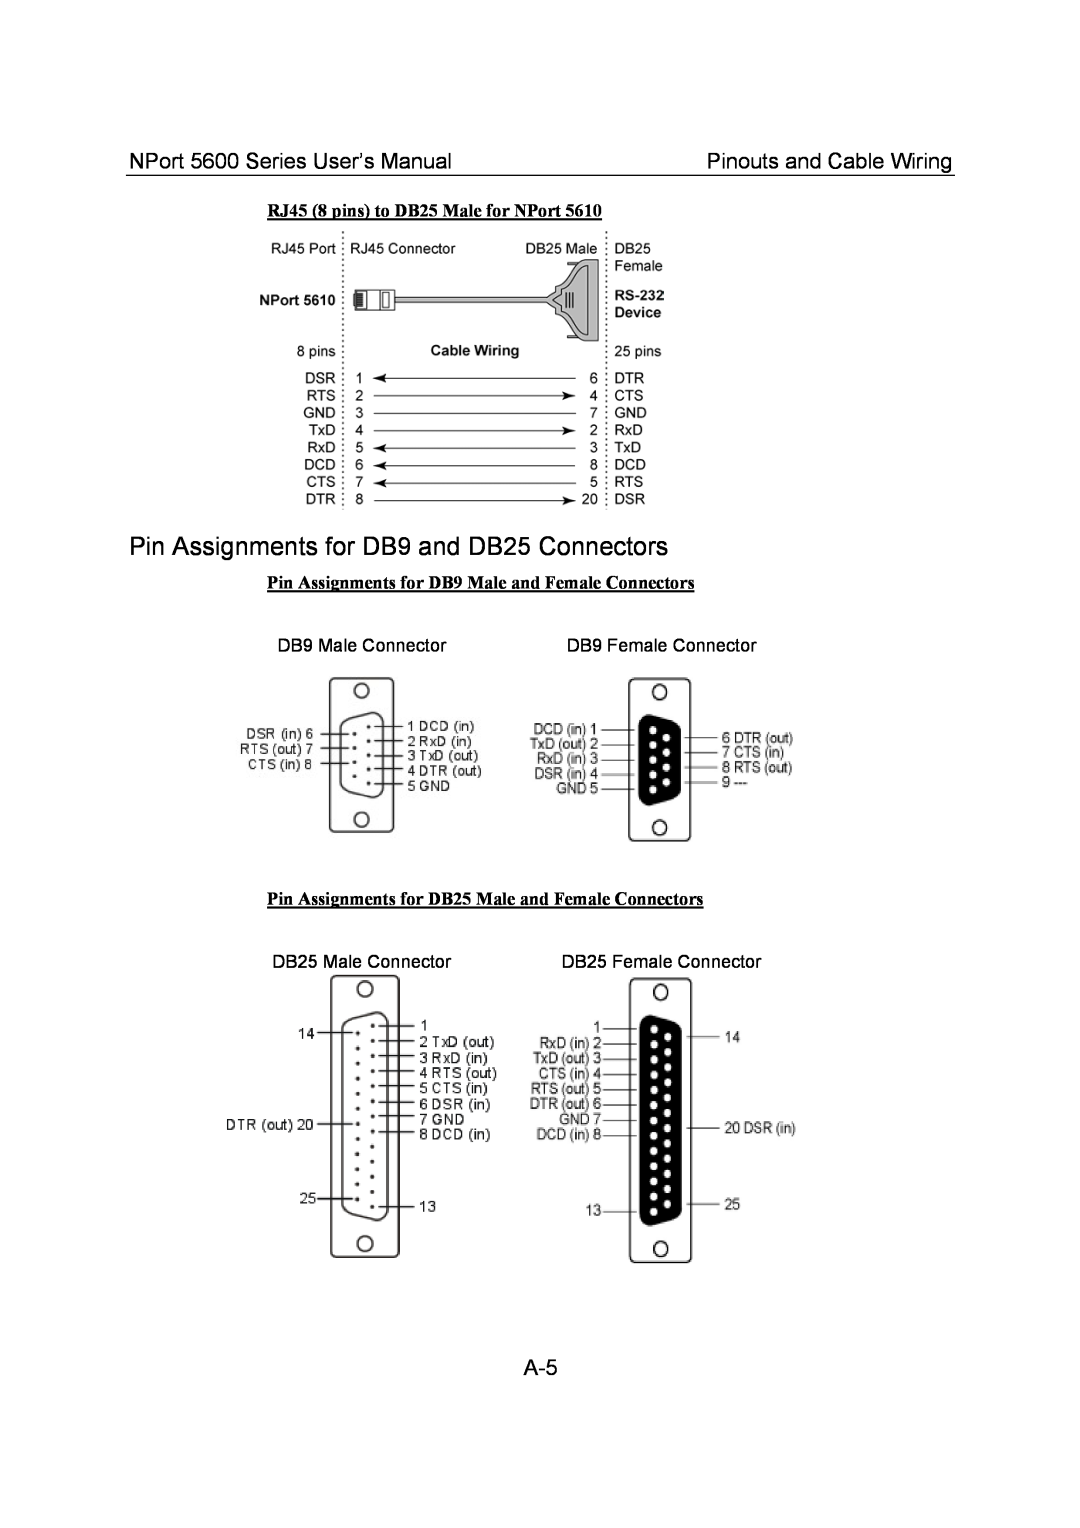 Moxa Technologies user manual Pin Assignments for DB9 and DB25 Connectors, NPort 5600 Series User’s Manual 